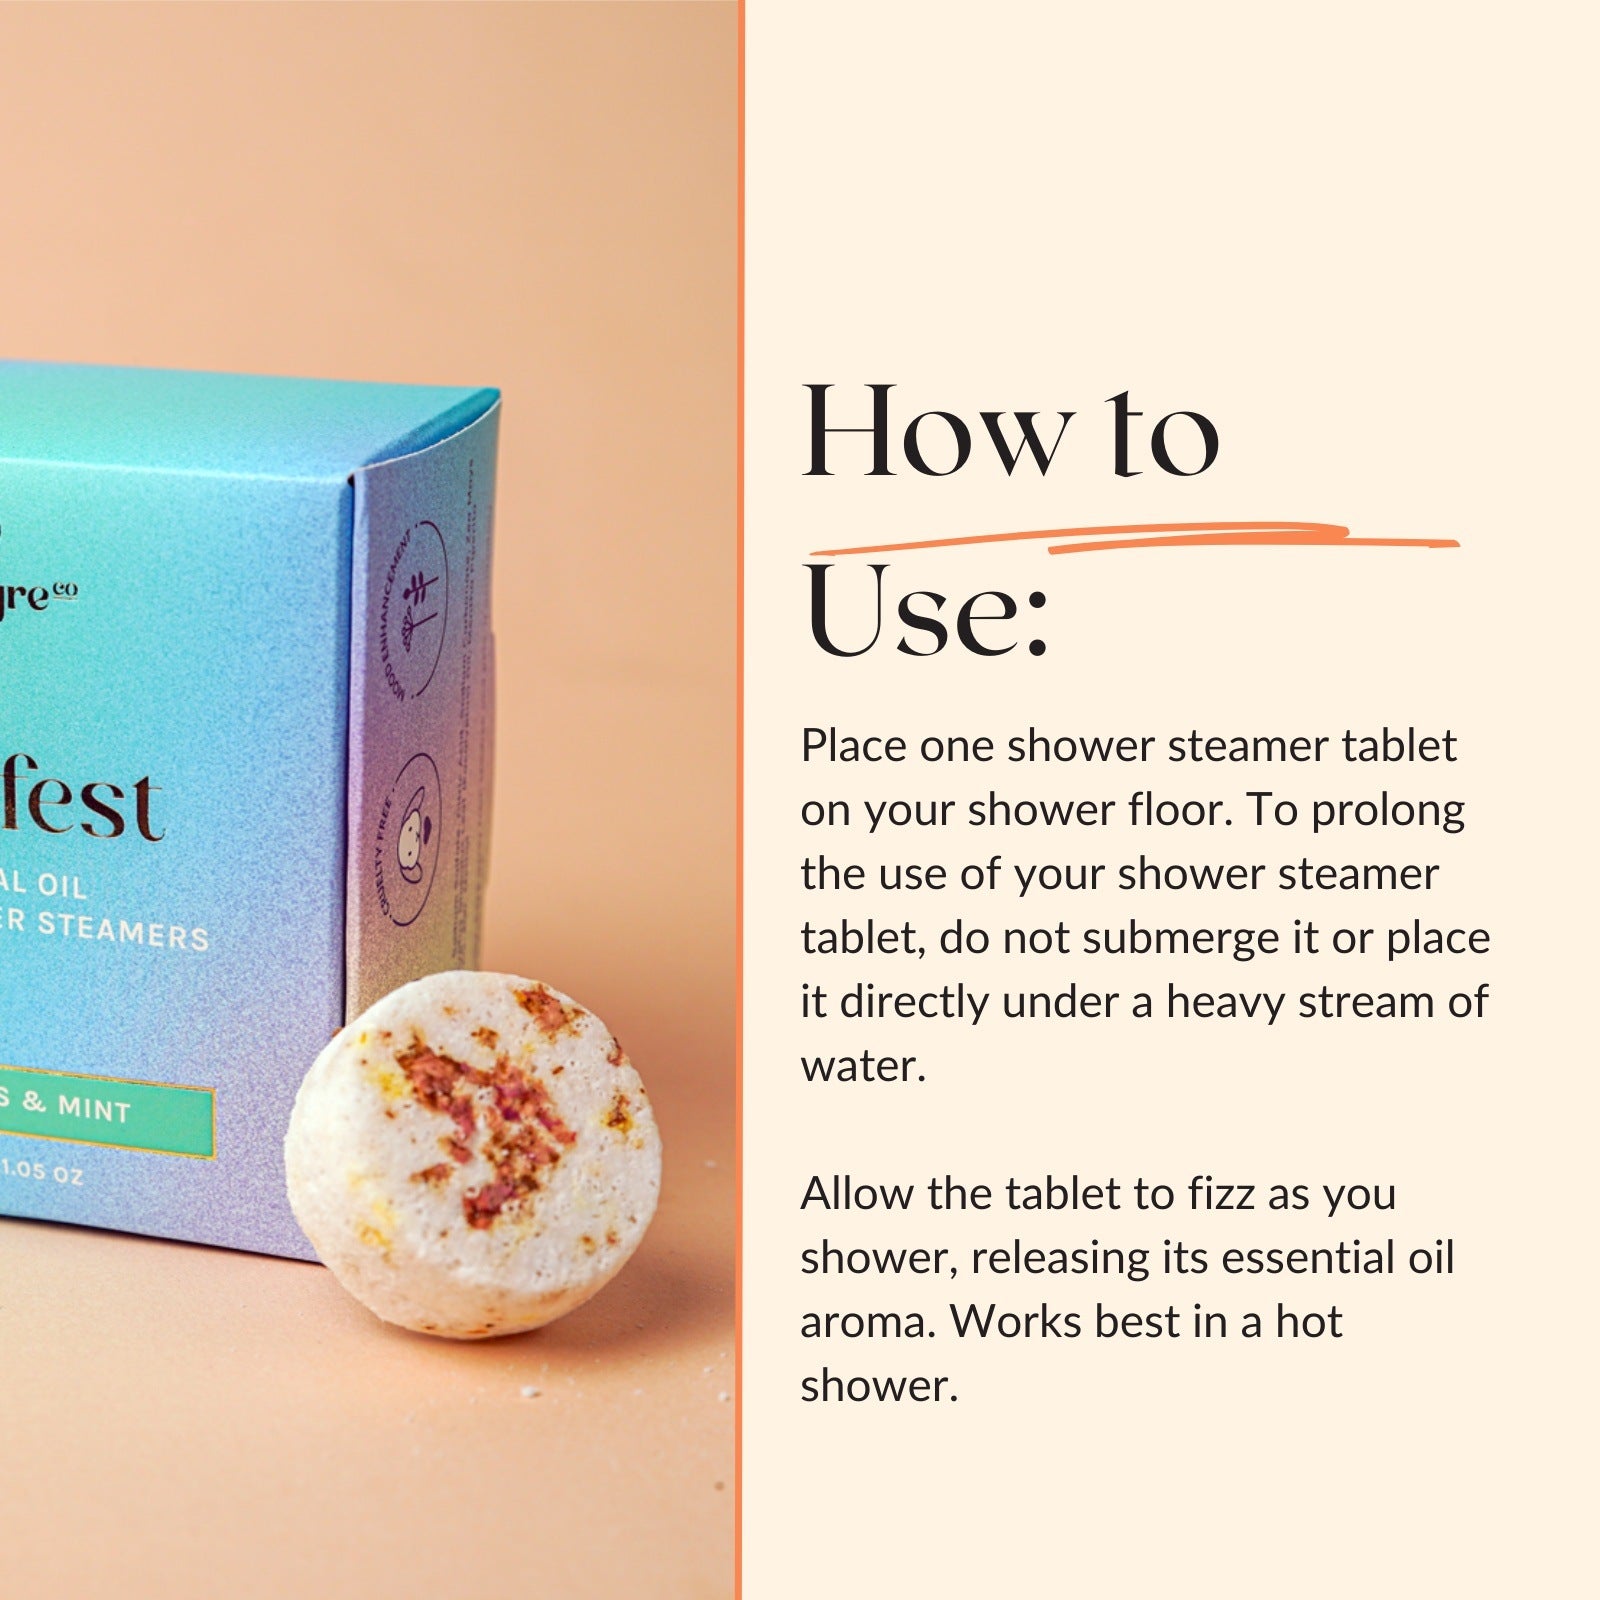 How to Use Shower Steamers